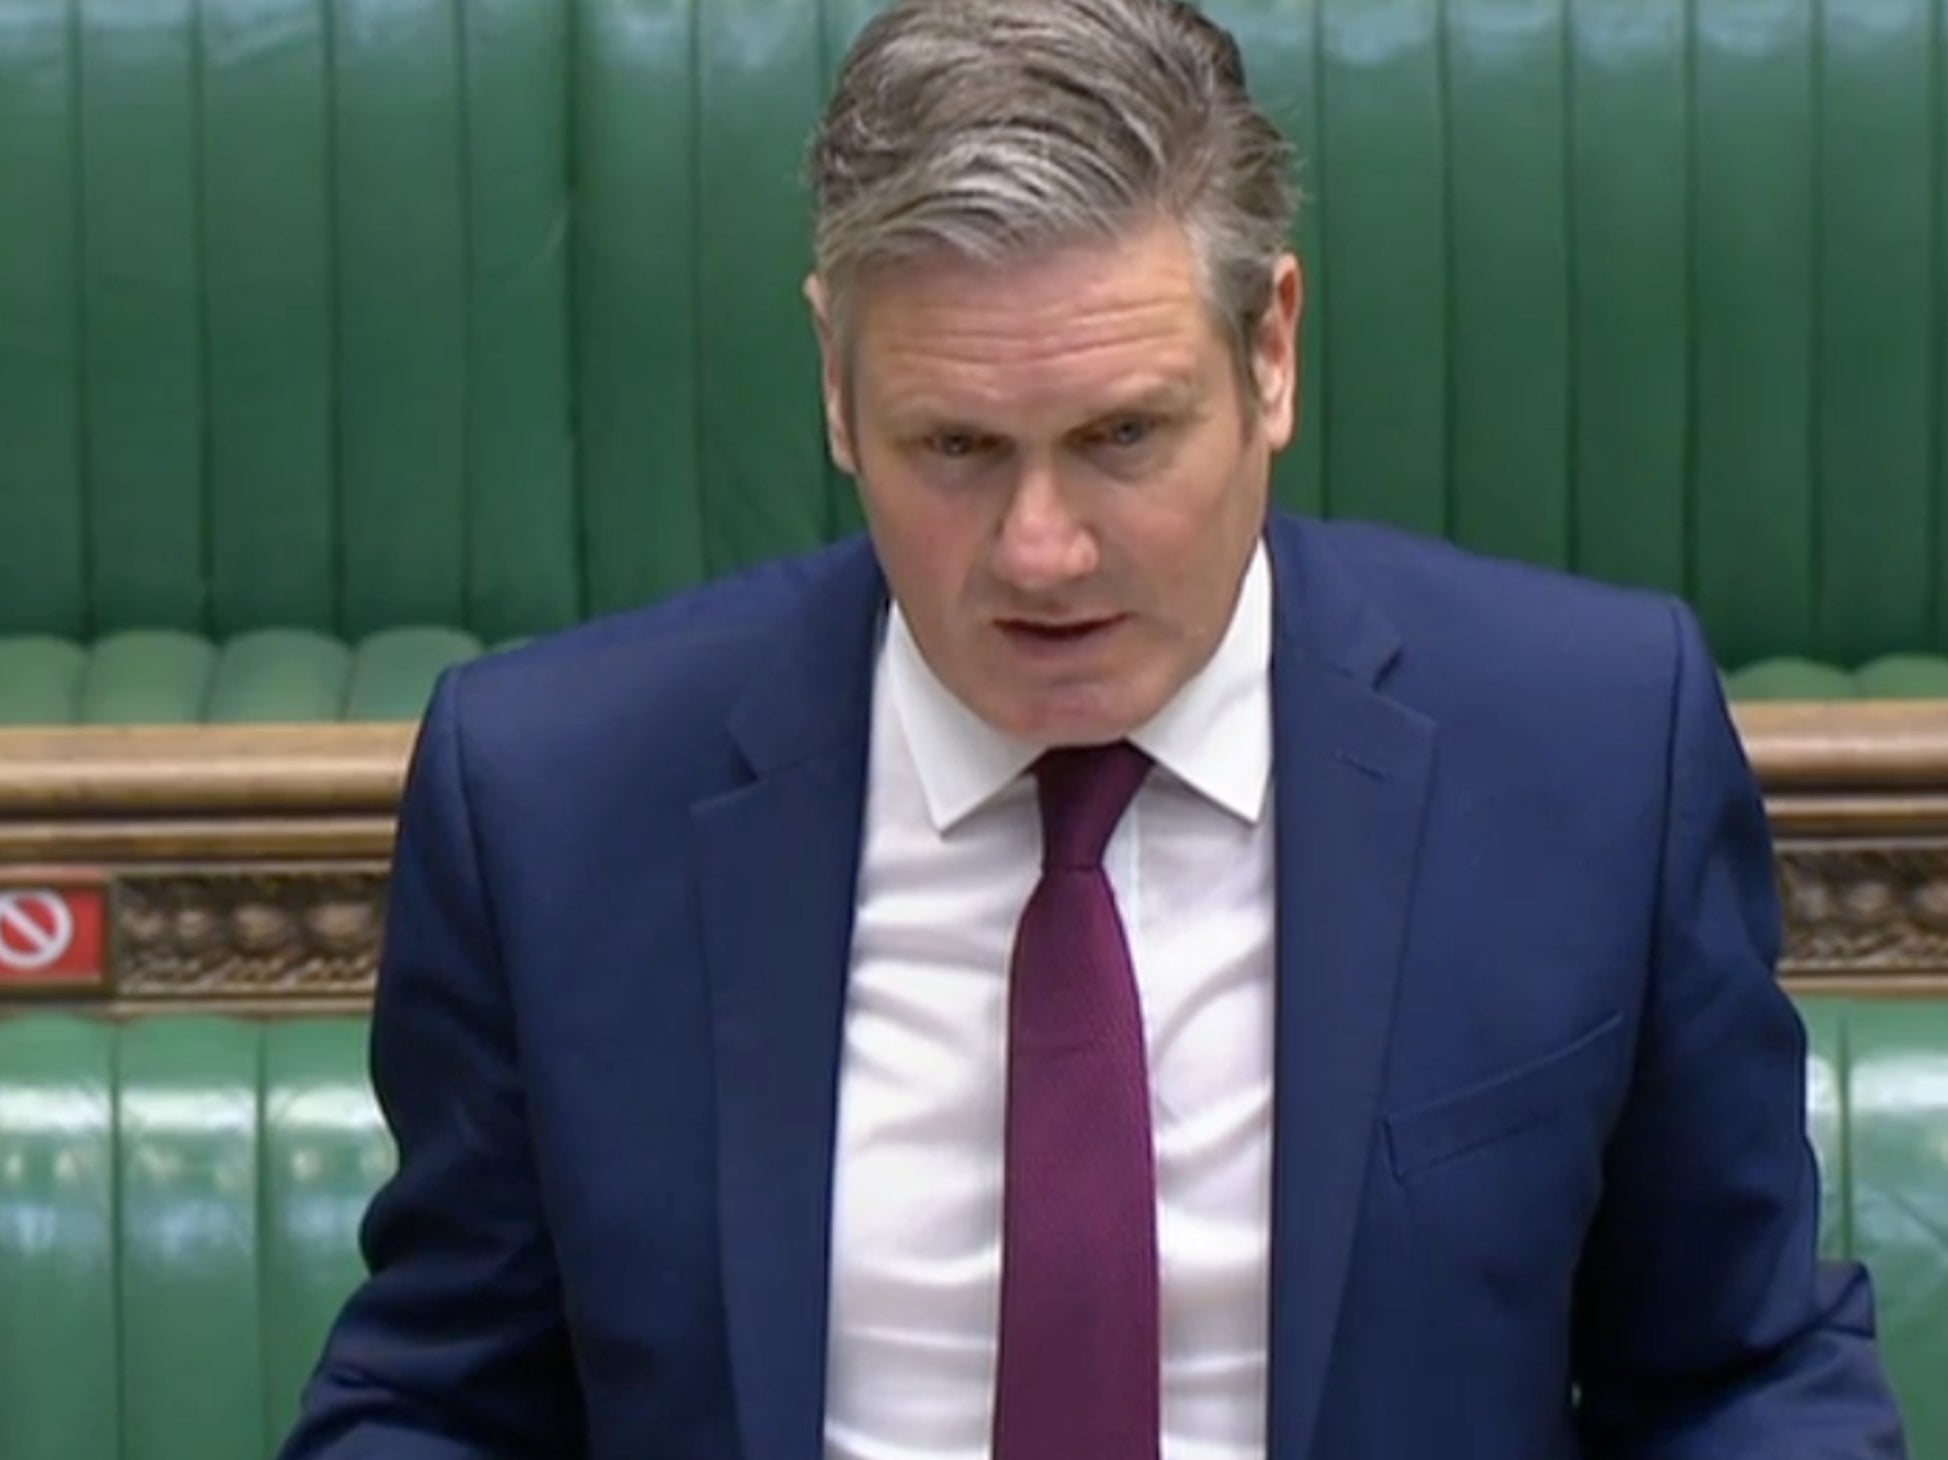 ‘Let me take this very slowly for the PM,’ said Keir Starmer